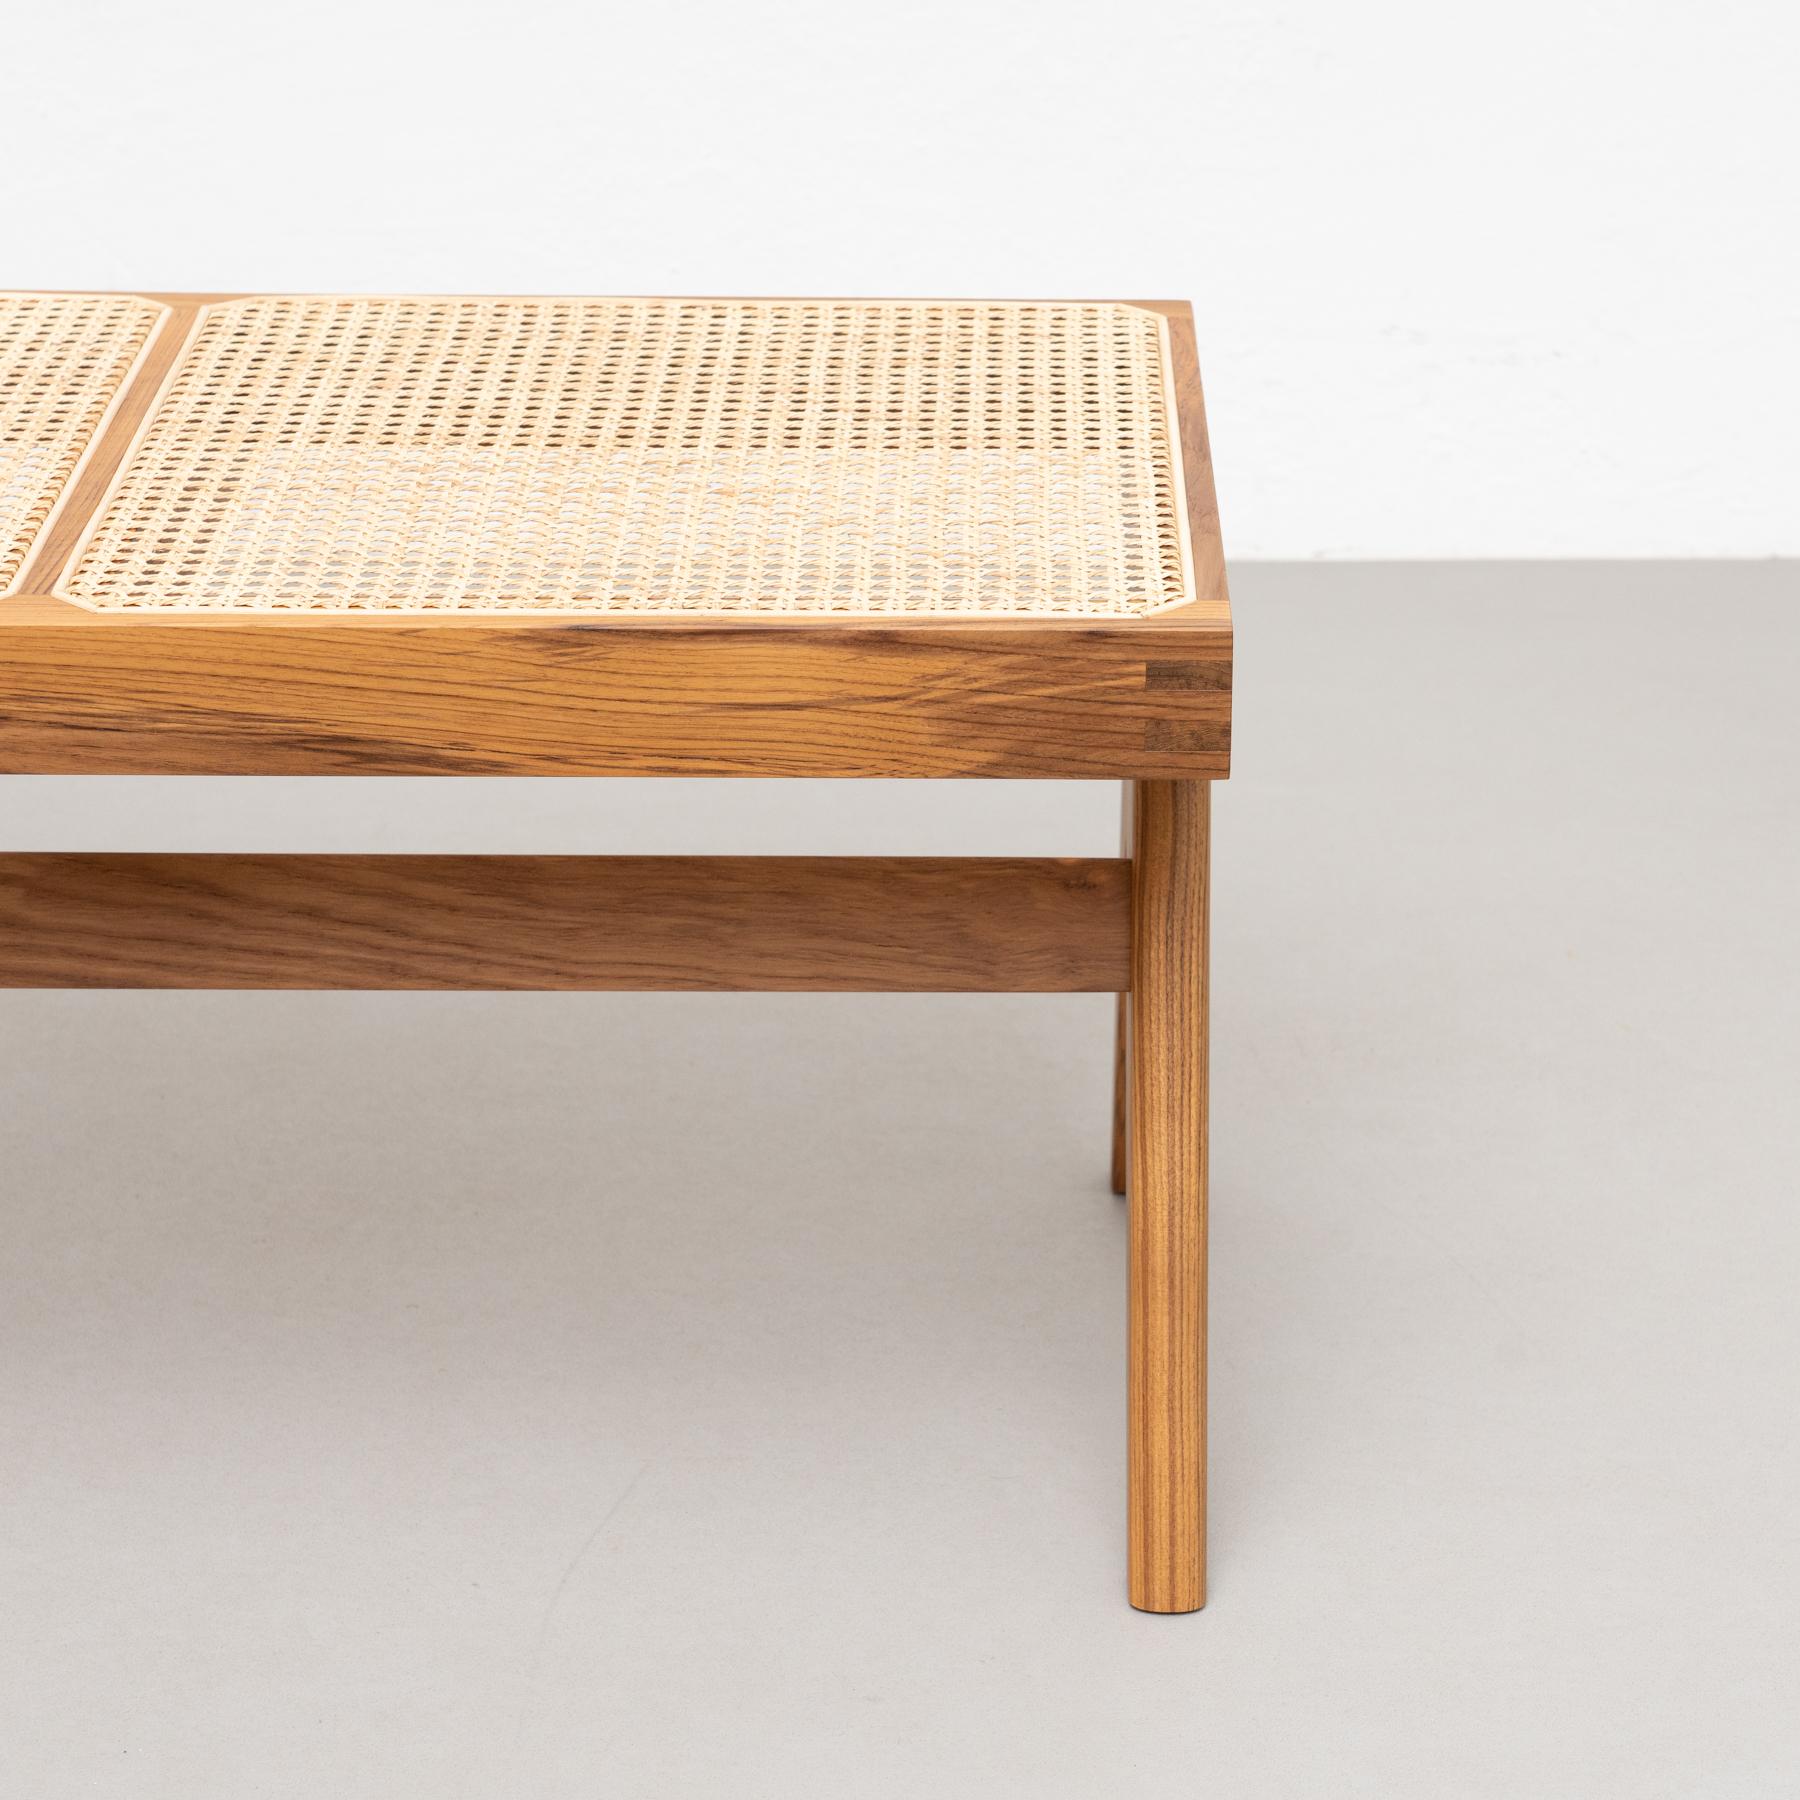 Pierre Jeanneret 057 Civil Bench, Wood and Woven Viennese Cane 4